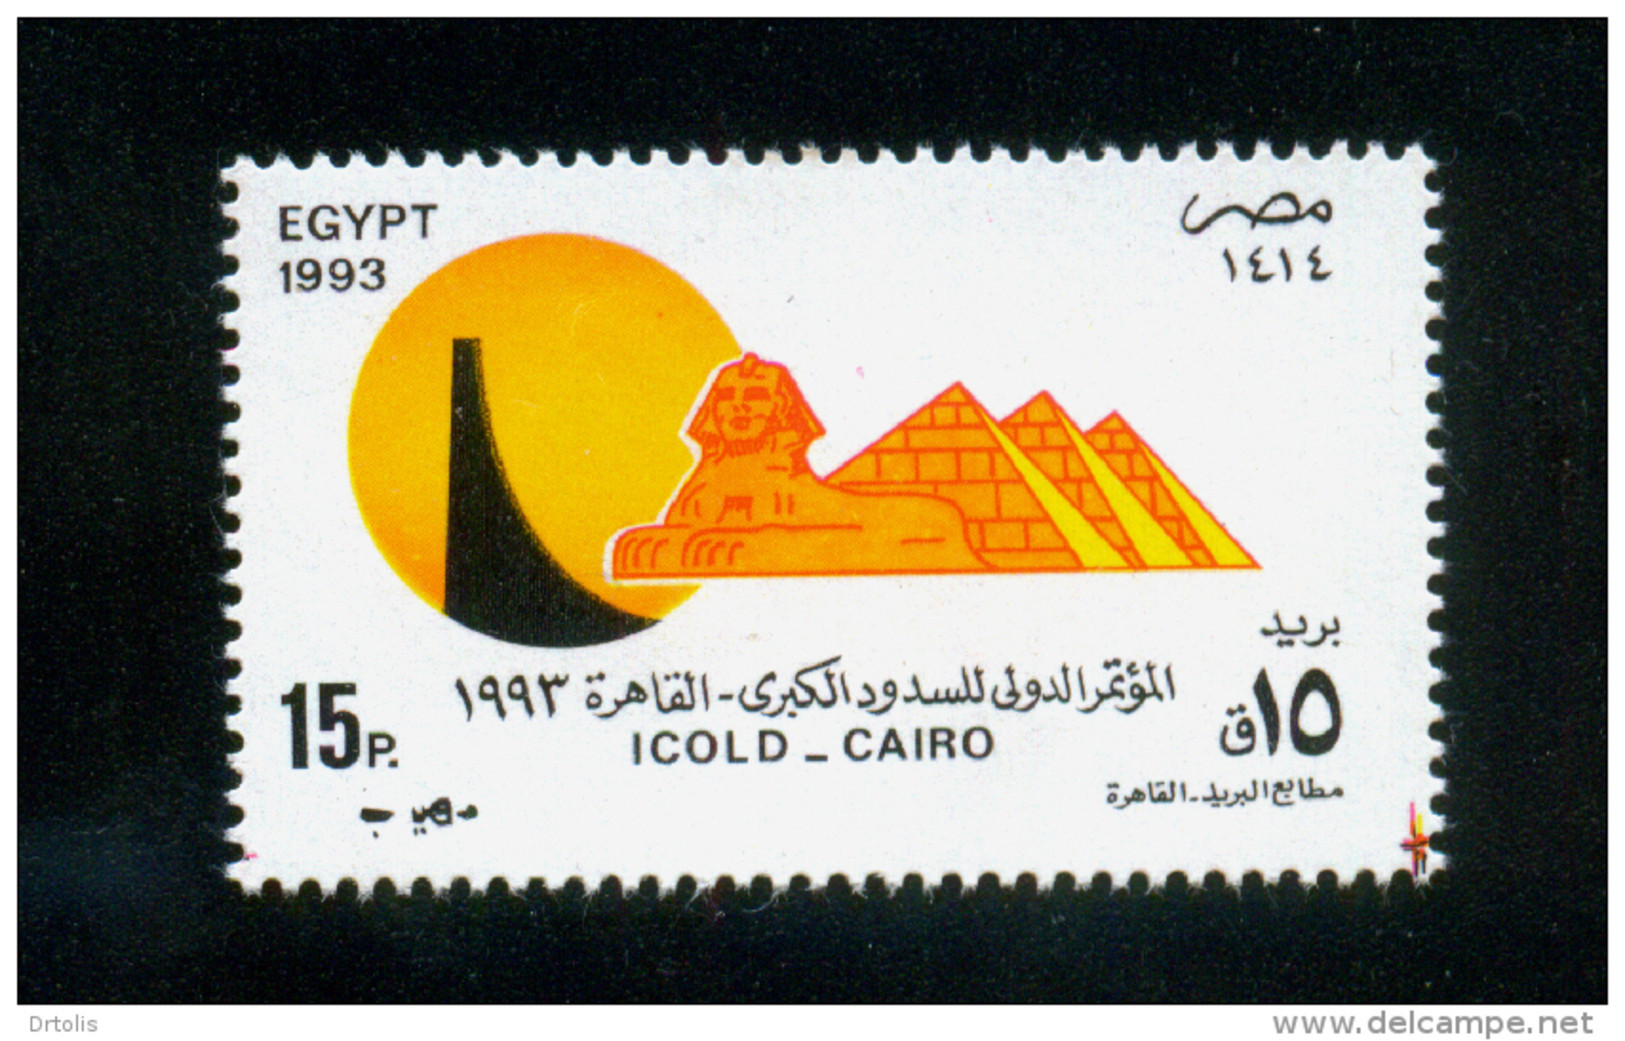 EGYPT / 1993 / ICOLD / INTL. CONGRESS ON LARGE DAMS / PYRAMIDS / SPHINX / MNH / VF - Unused Stamps